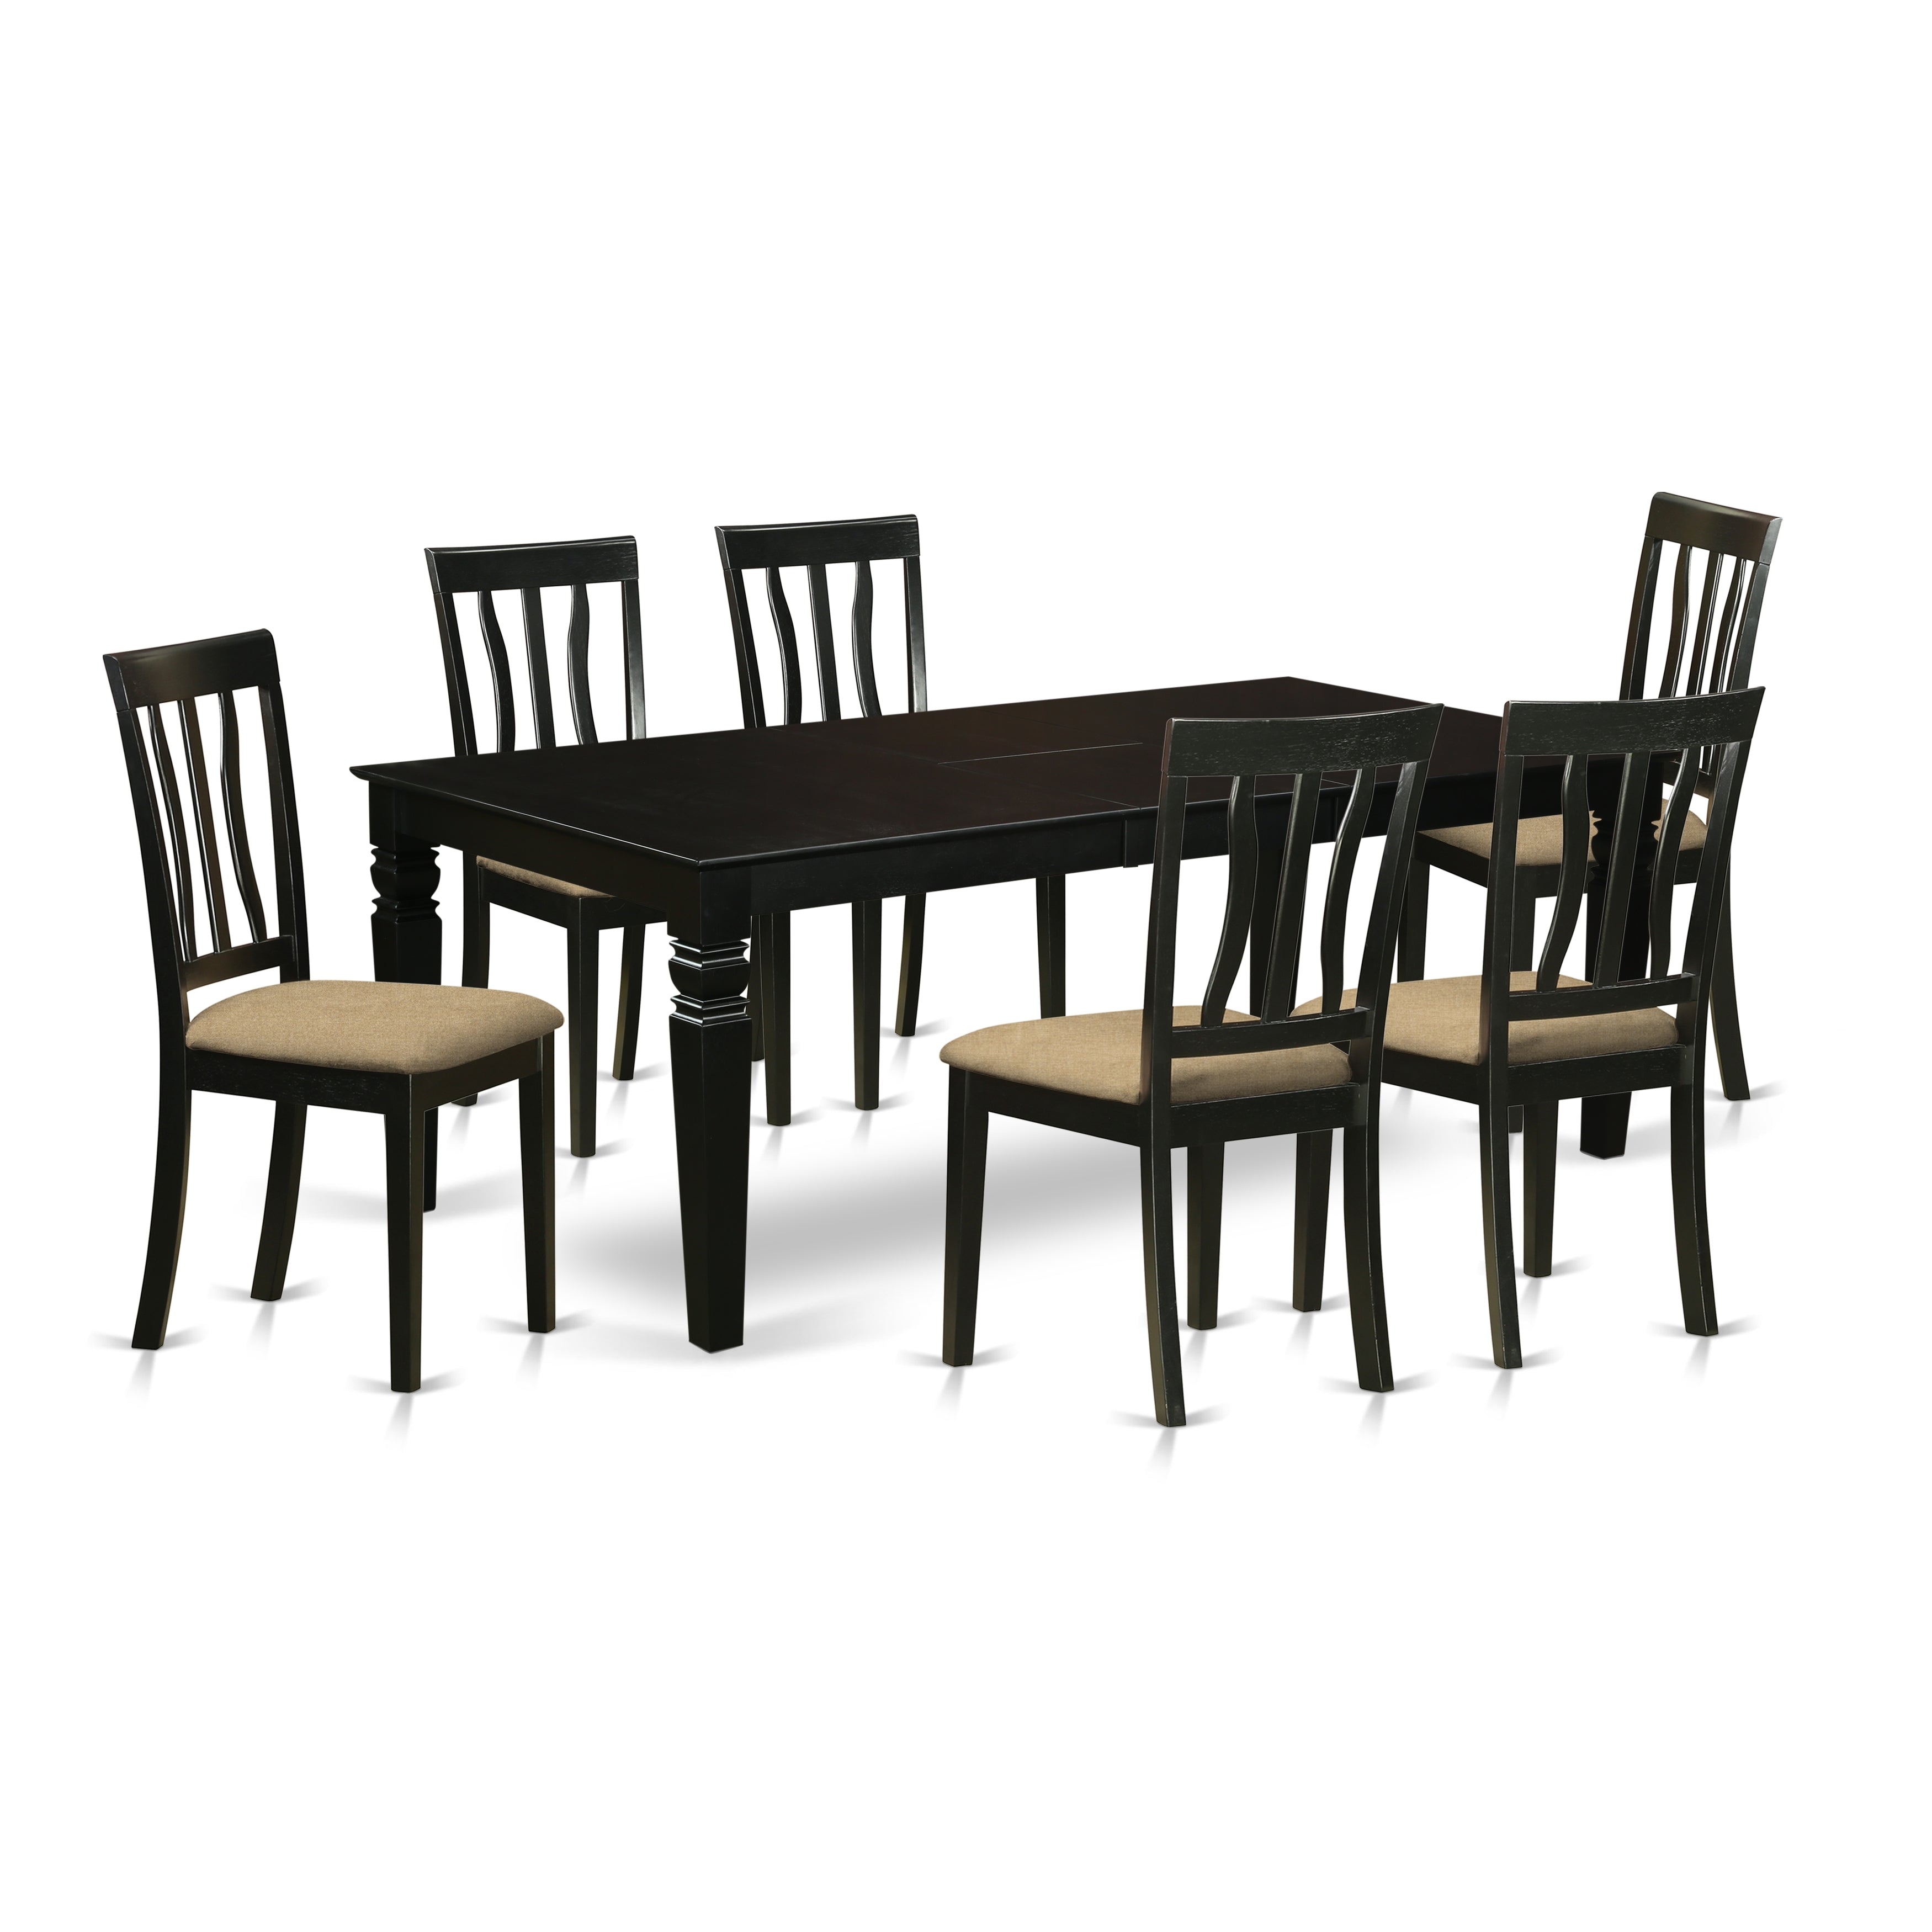 LGAN7-BLK-C 7 Pc Dining Room set with a Dining Table and 6 Microfiber Dining Chairs in Black